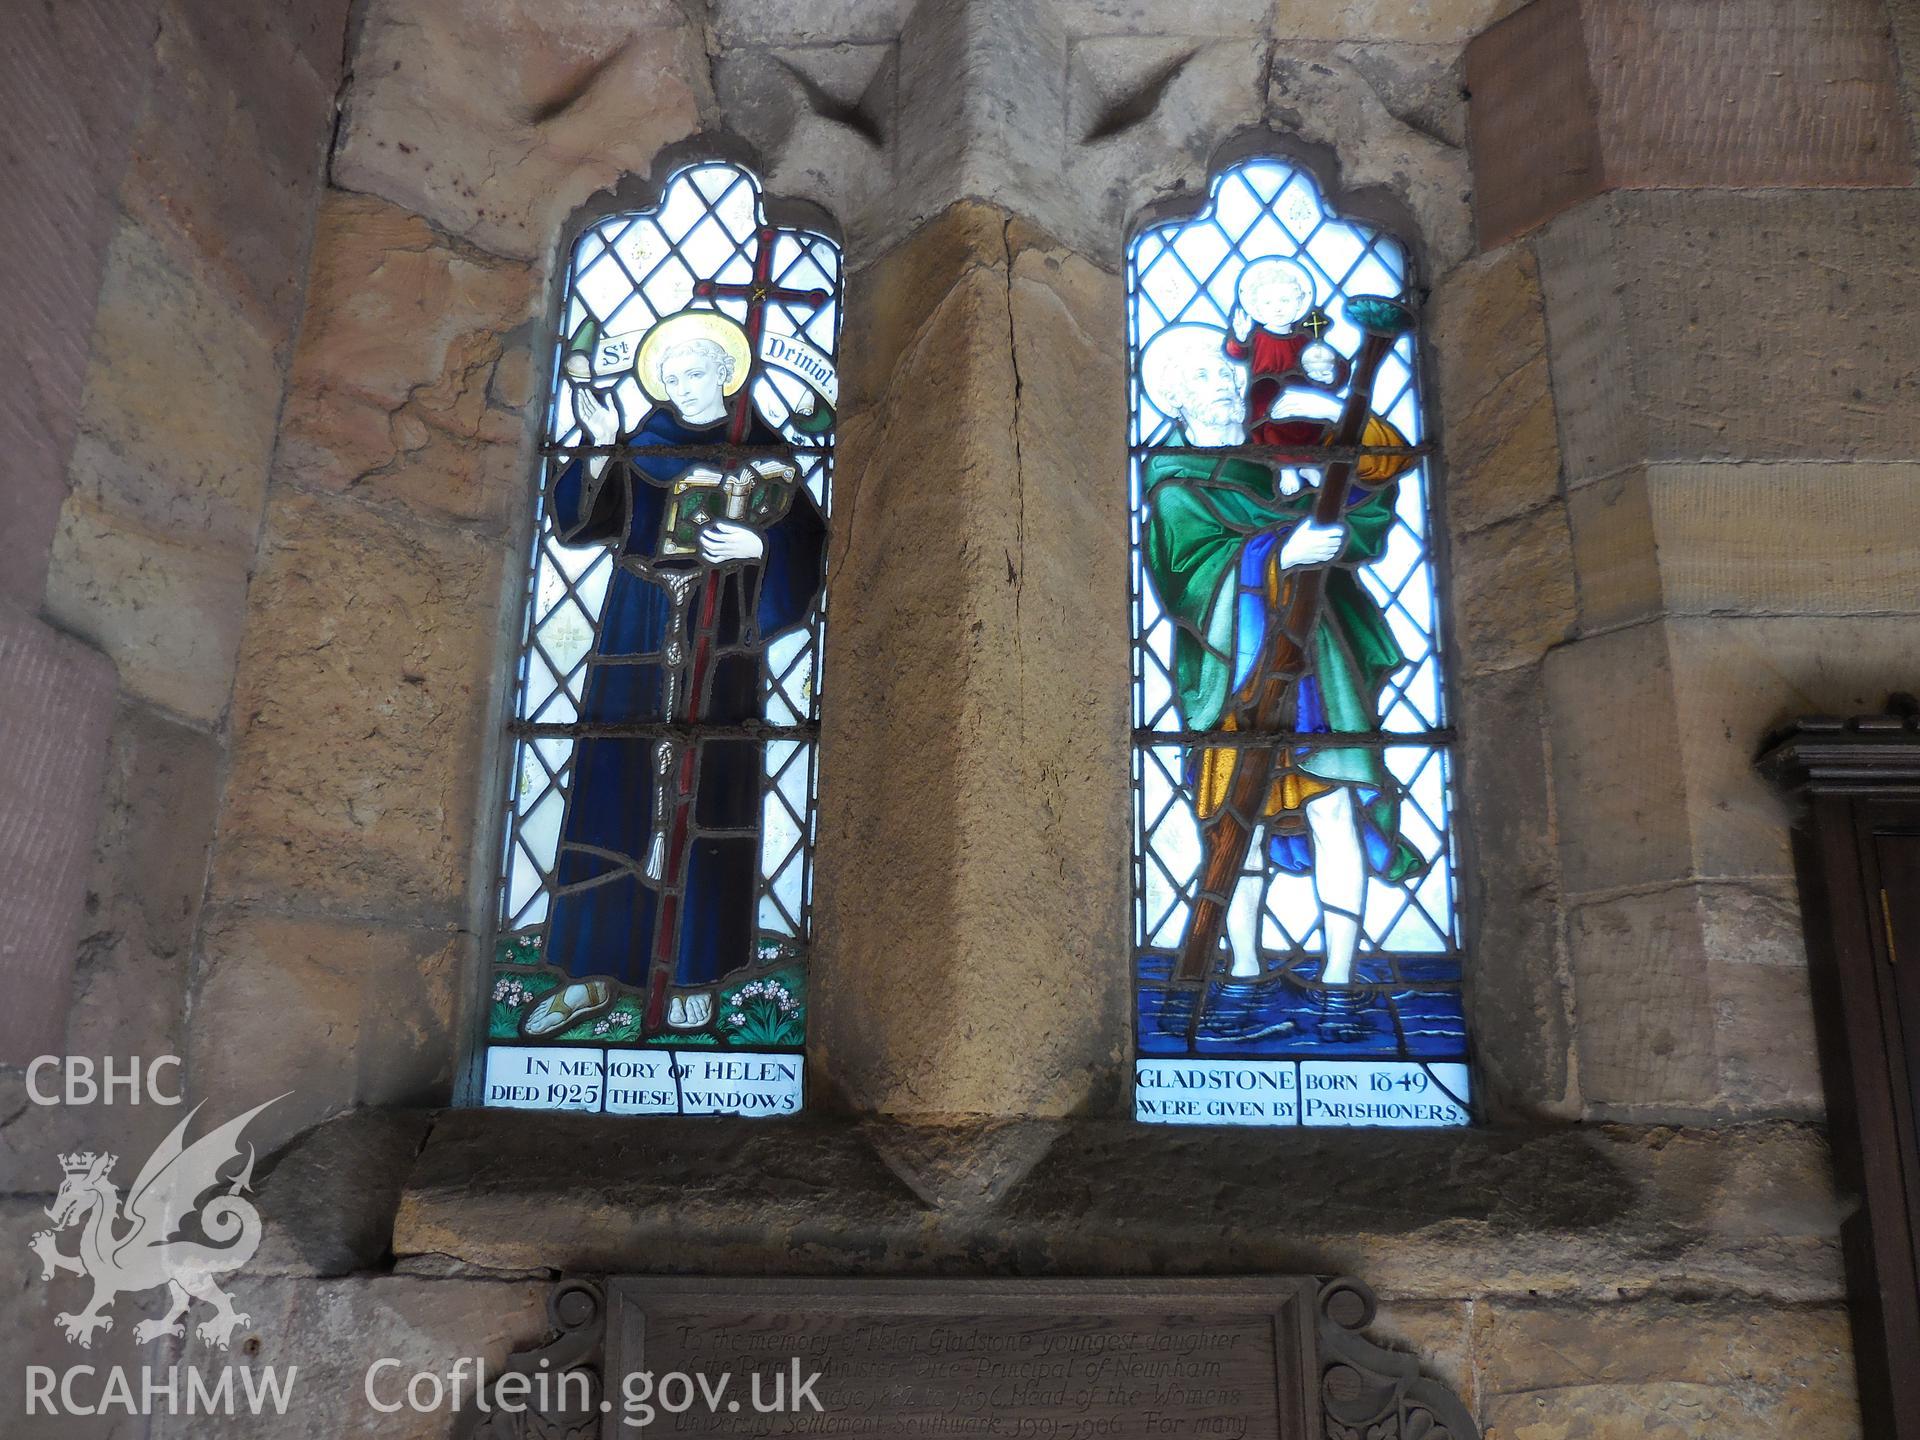 Colour digital photograph showing pair of 1928 stained glass windows dedicated to Helen Gladstone at St Deiniol's church, Hawarden, taken in March 2022.